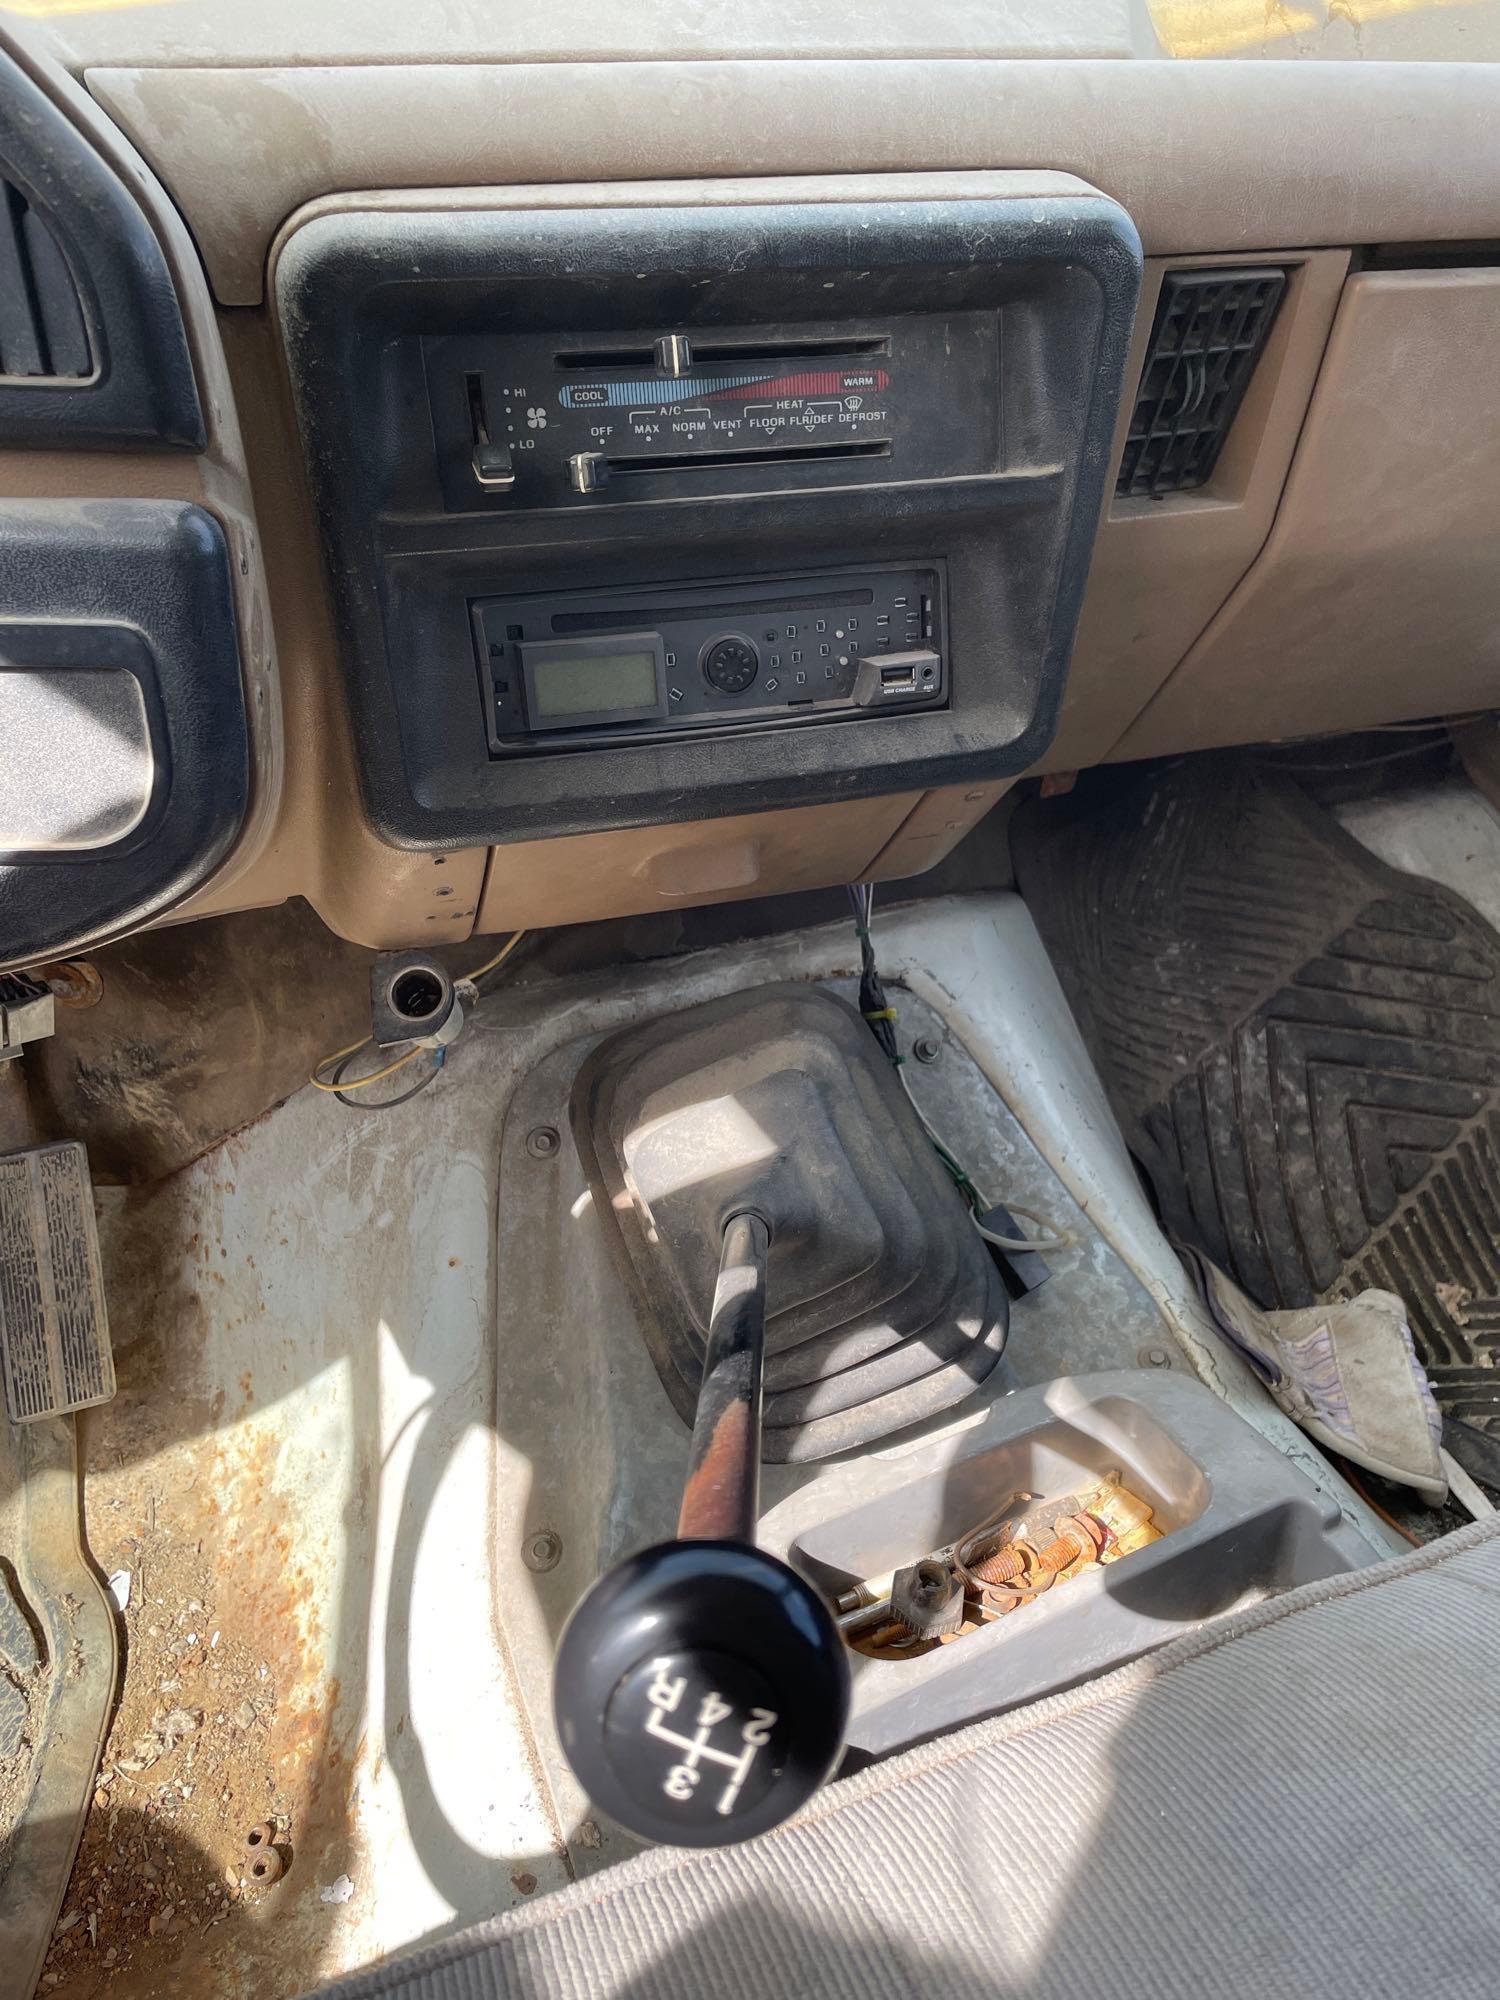 1989 Ford, F250 dually dump truck with V8 manual runs and drives